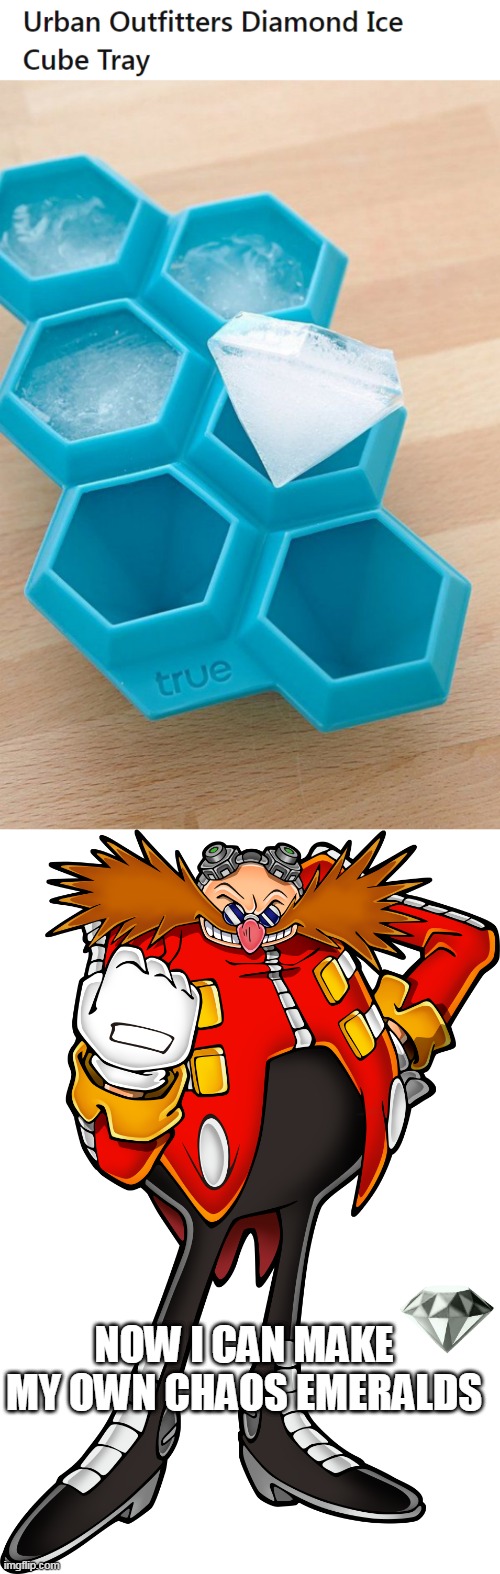 DR. ROBOTNIK MAKES HIS OWN EMERALDS | NOW I CAN MAKE MY OWN CHAOS EMERALDS | image tagged in robotnik,sonic the hedgehog,diamonds,ice cube,video games | made w/ Imgflip meme maker